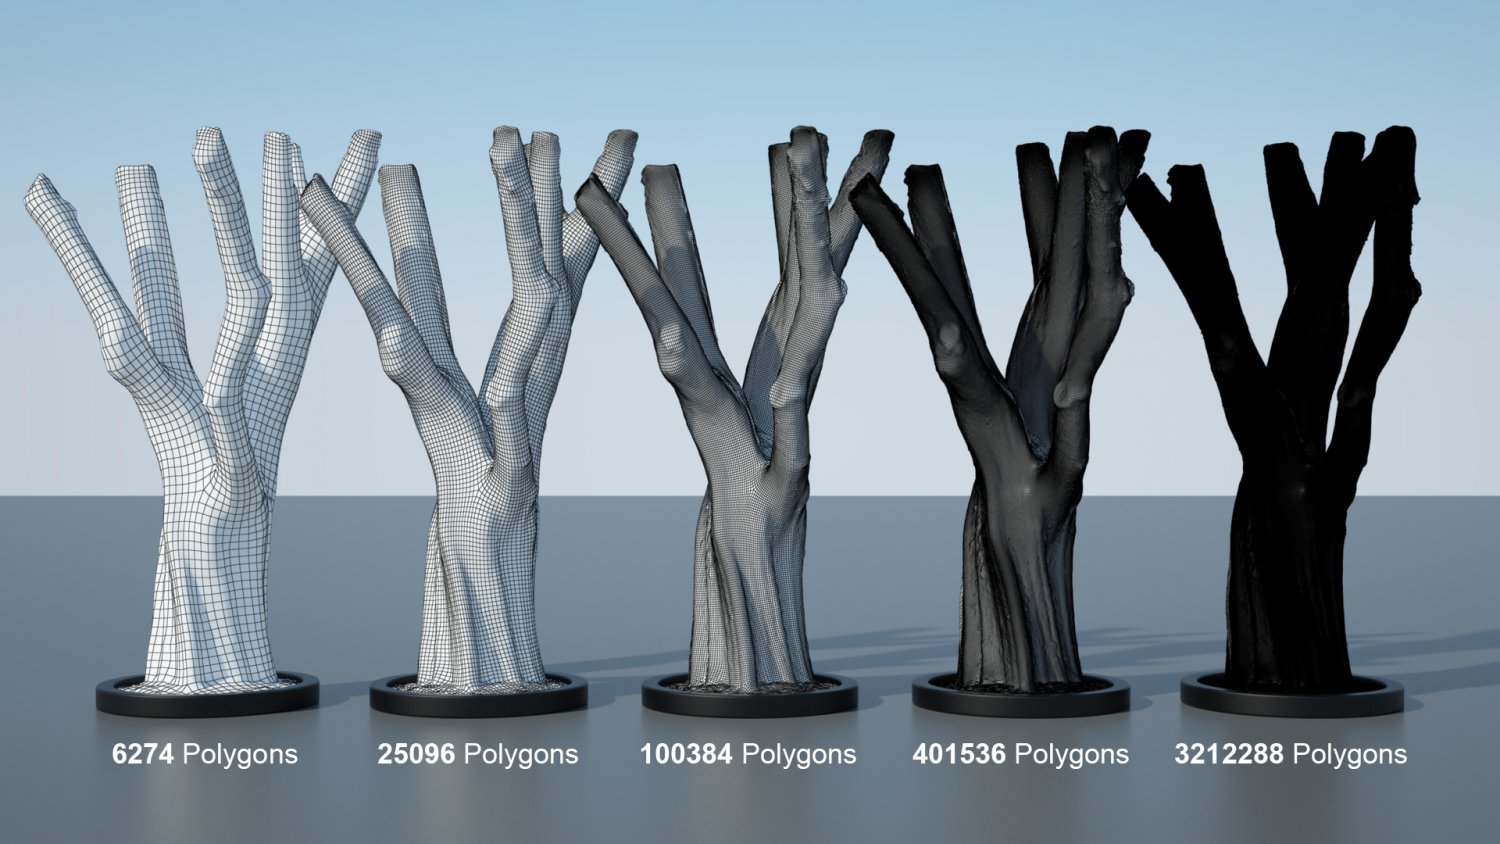 Tall Tree With Long Trunk | 3D model